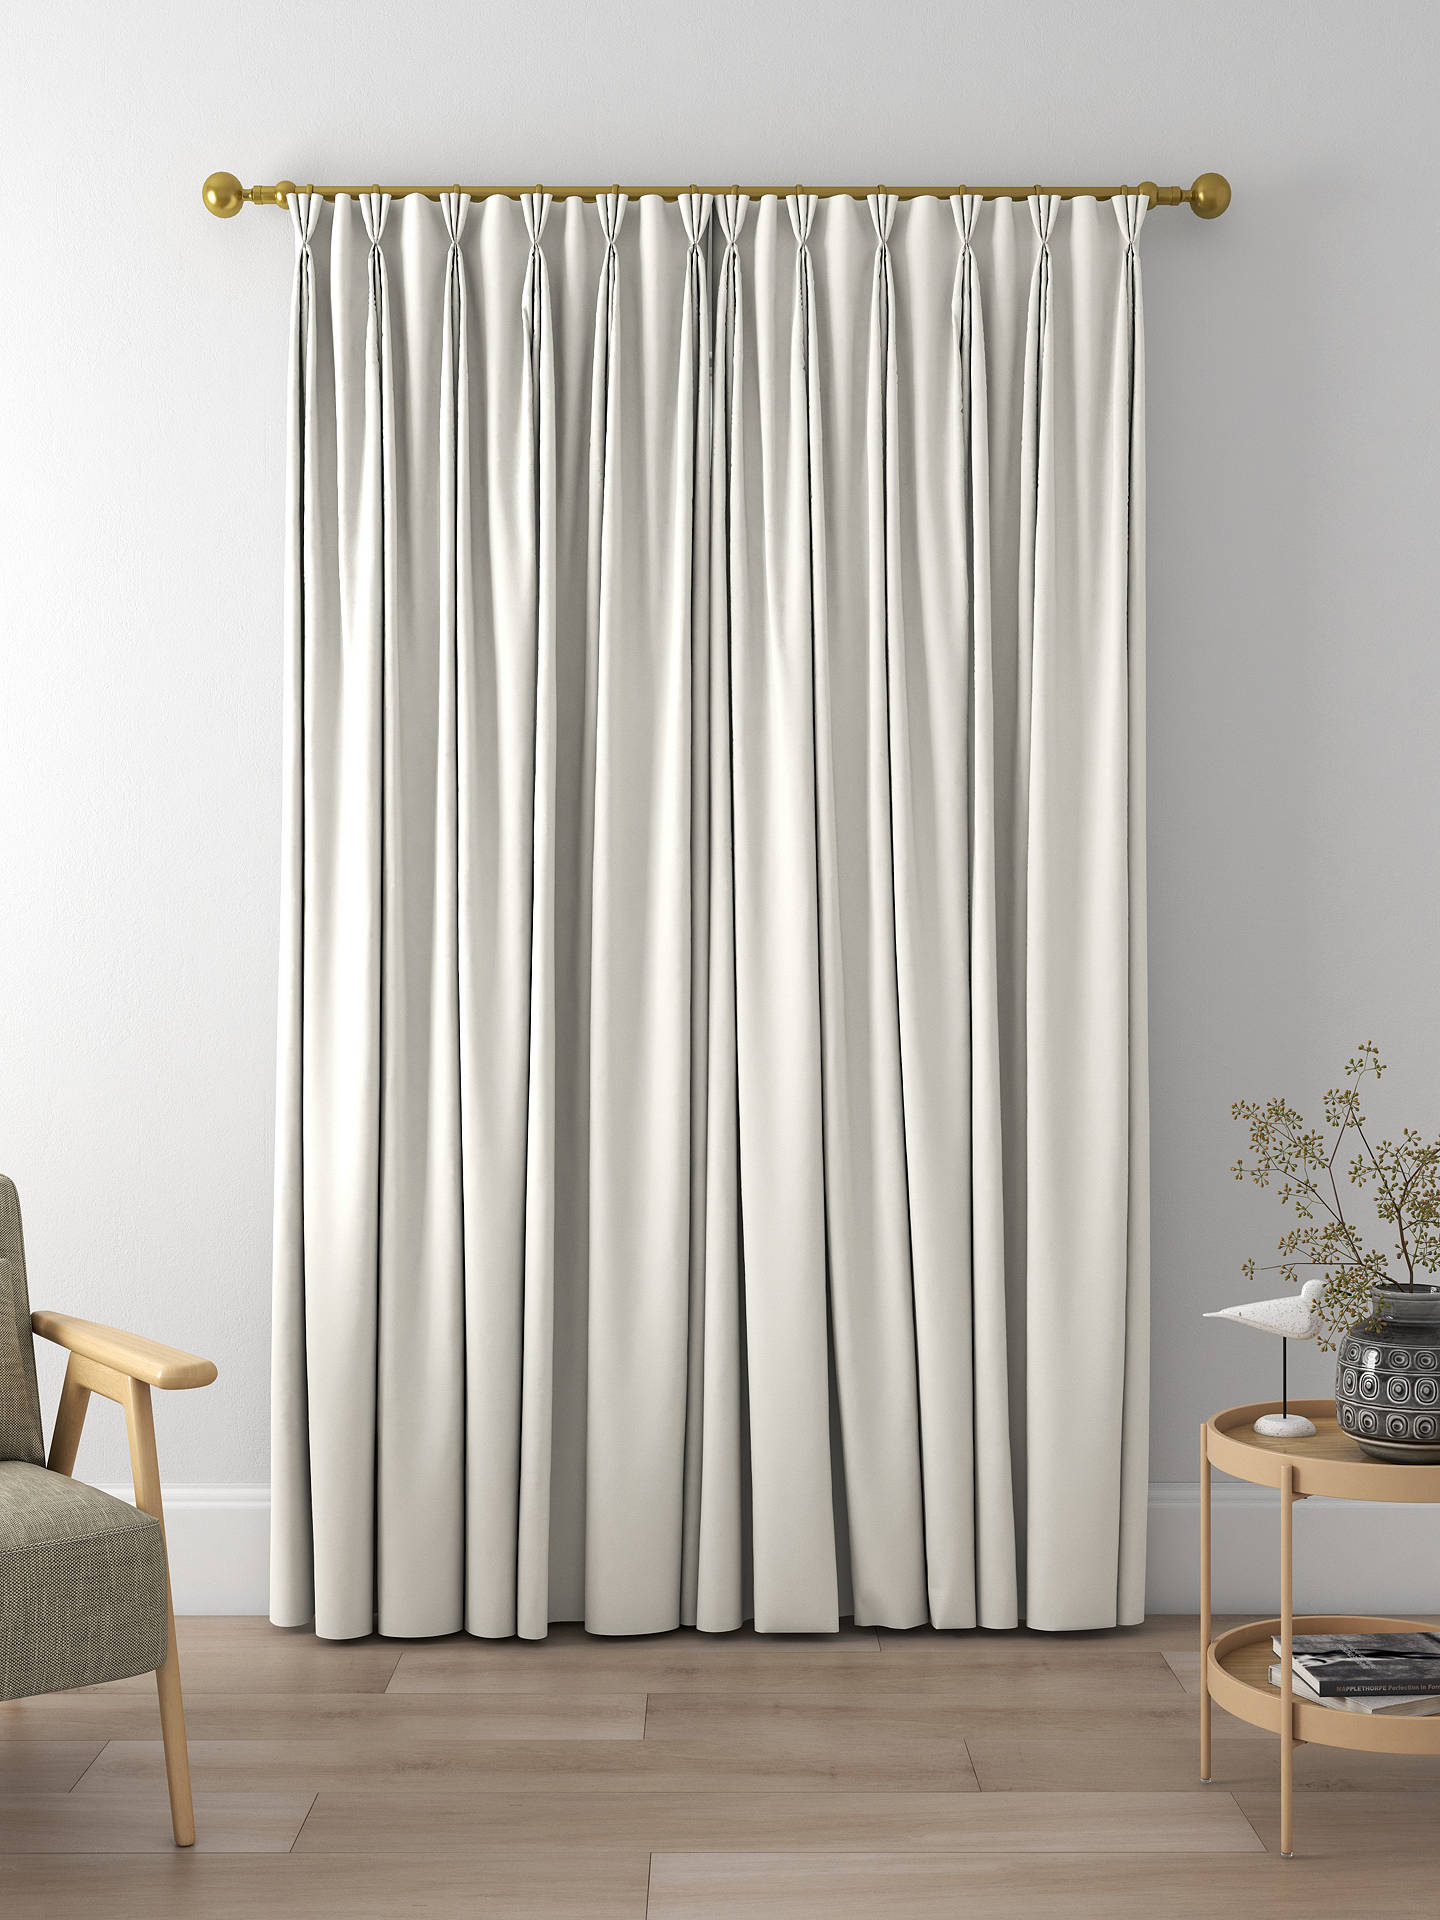 John Lewis Textured Twill Made to Measure Curtains, Putty